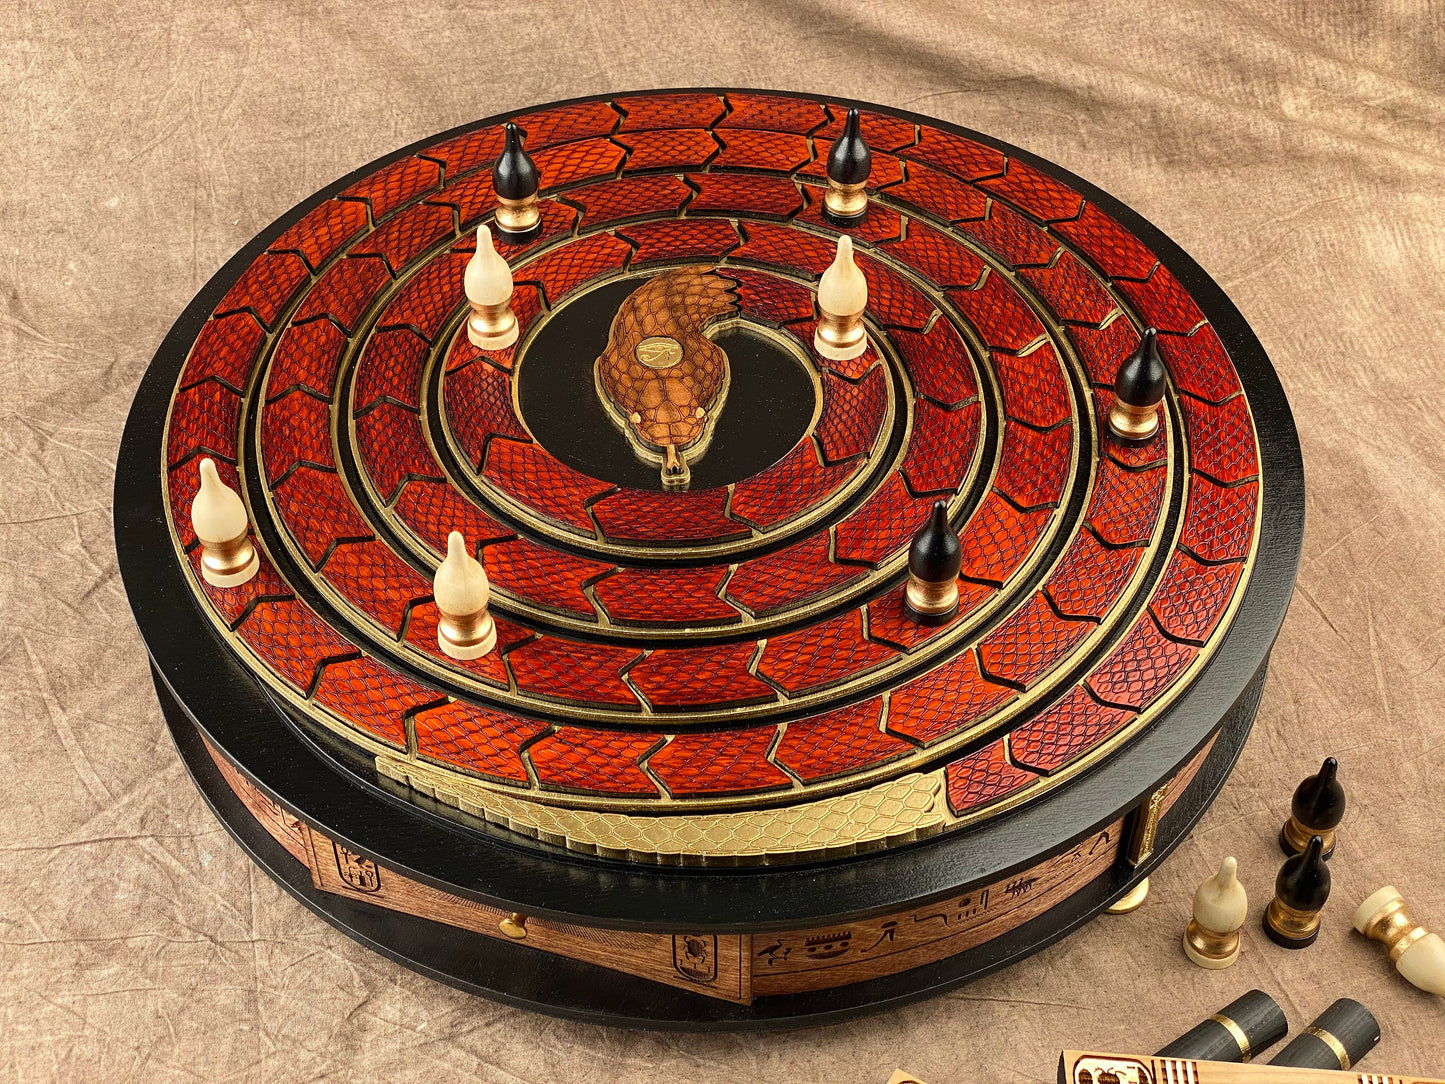 The Pharoahs Game of MEHEN ~ Museum Quality Craftsmanship ~ Custom made stunning Board Game from Ancient Egypt. LIMITED EDITION